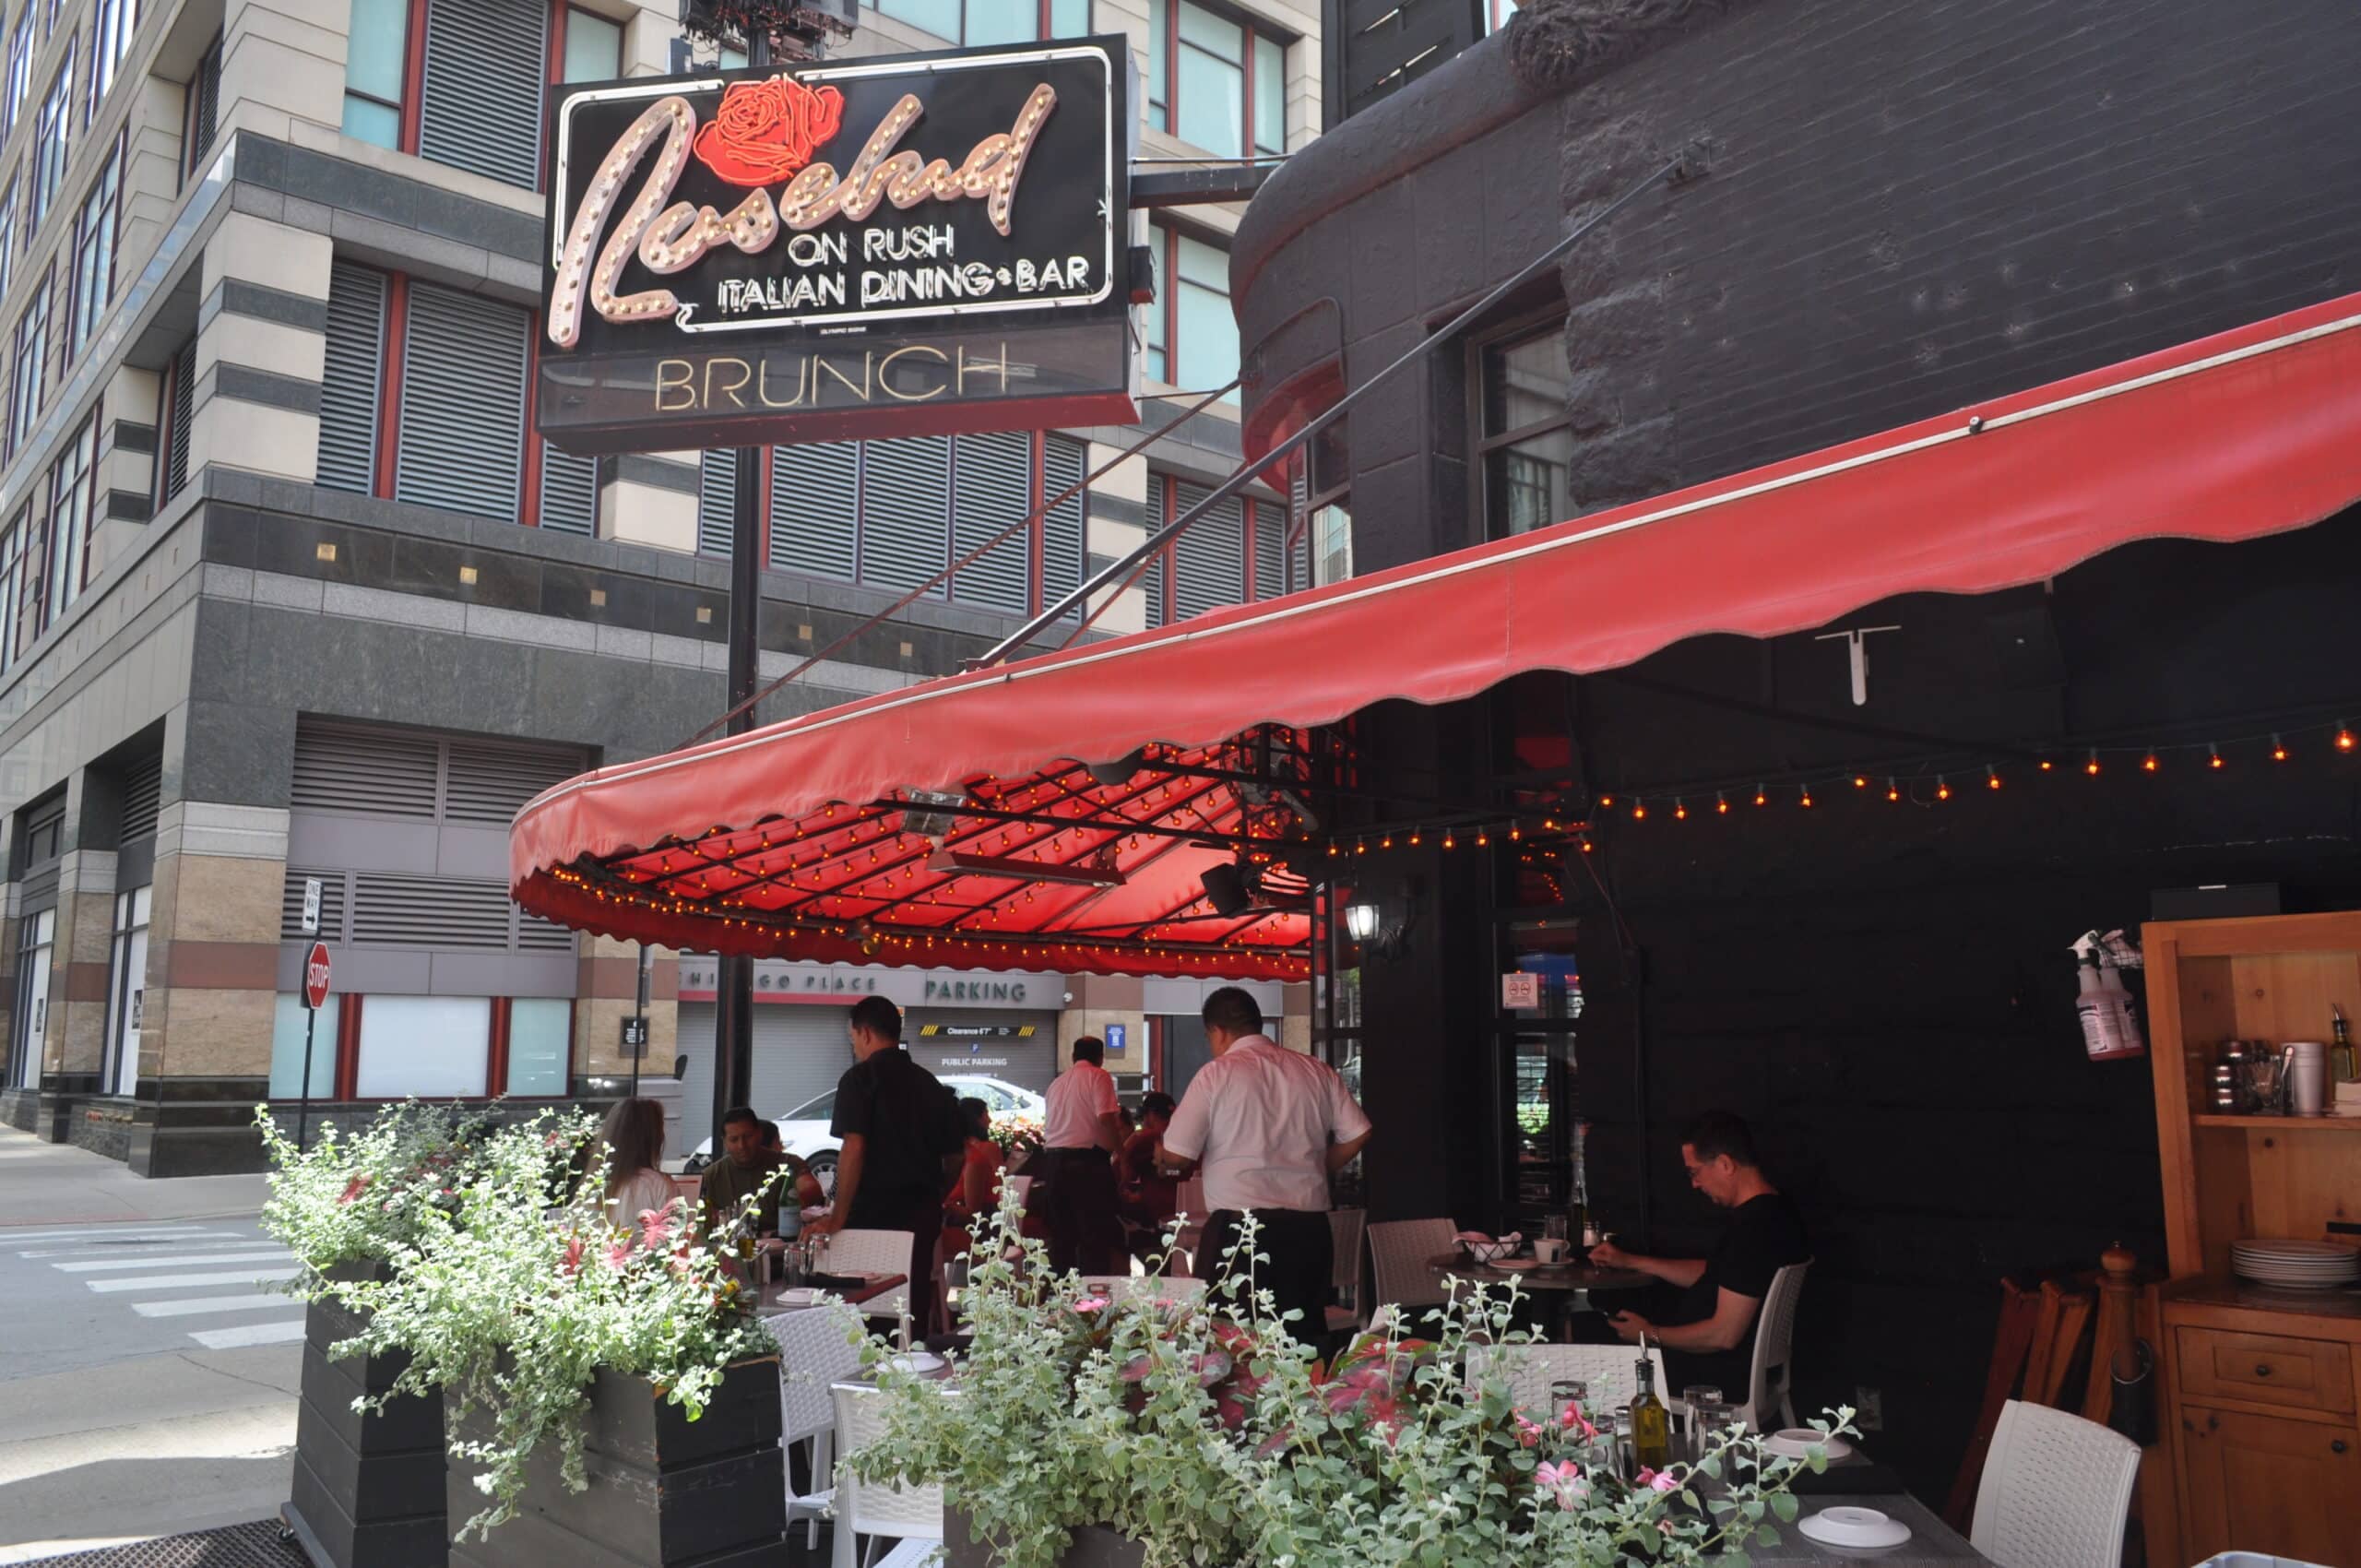 Rosebud American Kitchen and Bar - A Little Bit About a Lot of